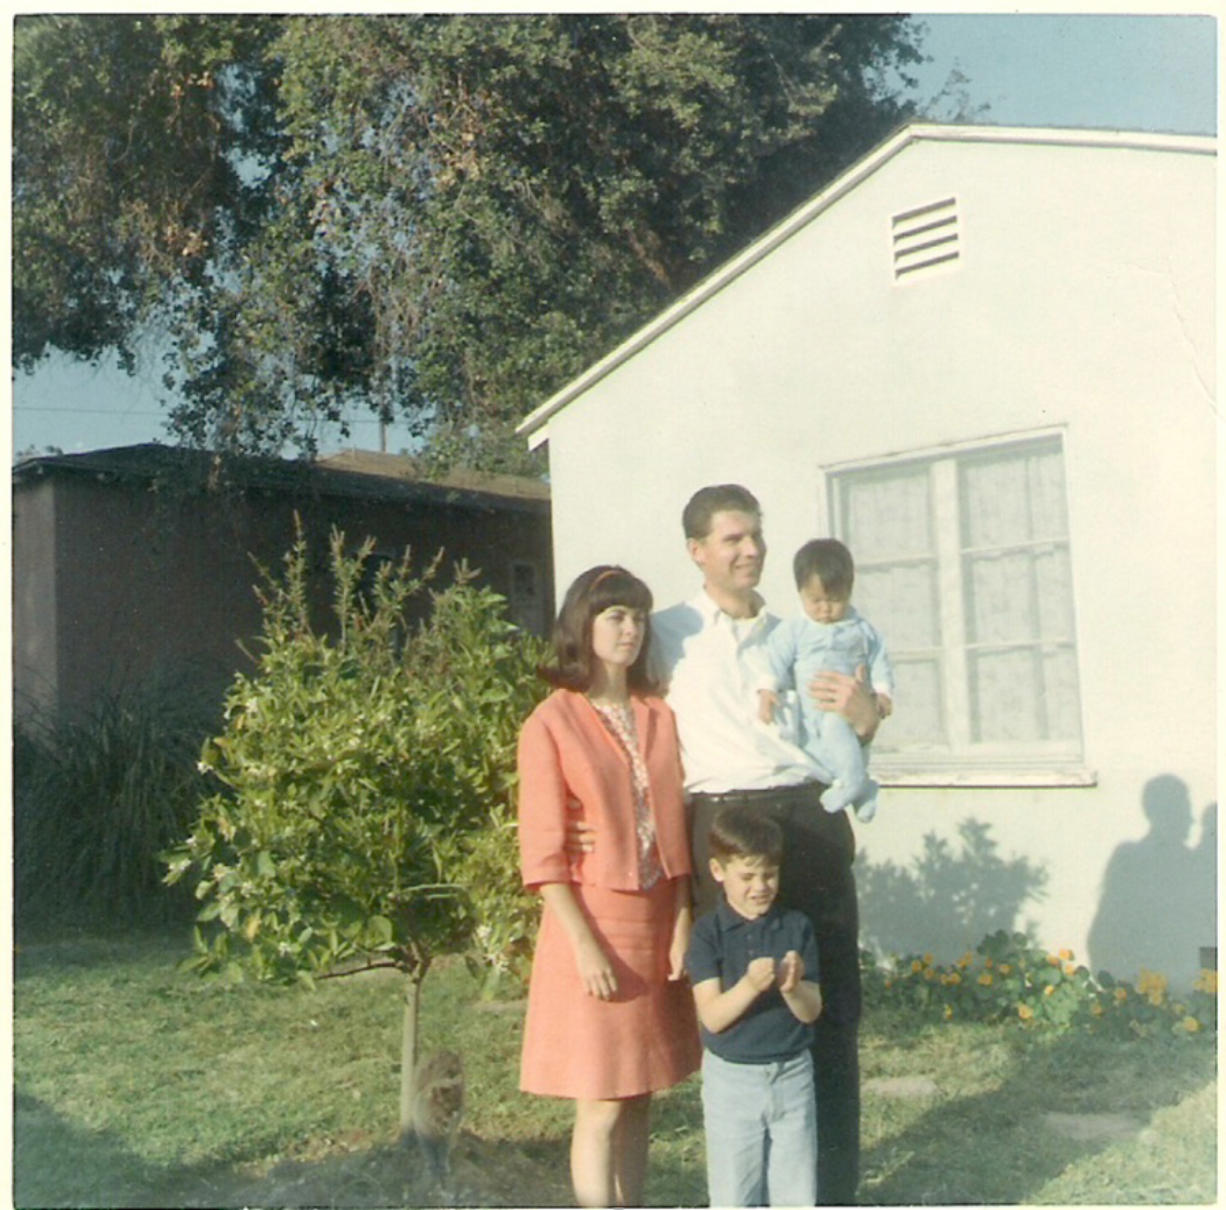 Joy Alessi is shown as a baby with her adoptive family at her childhood home in Los Angeles around 1967.